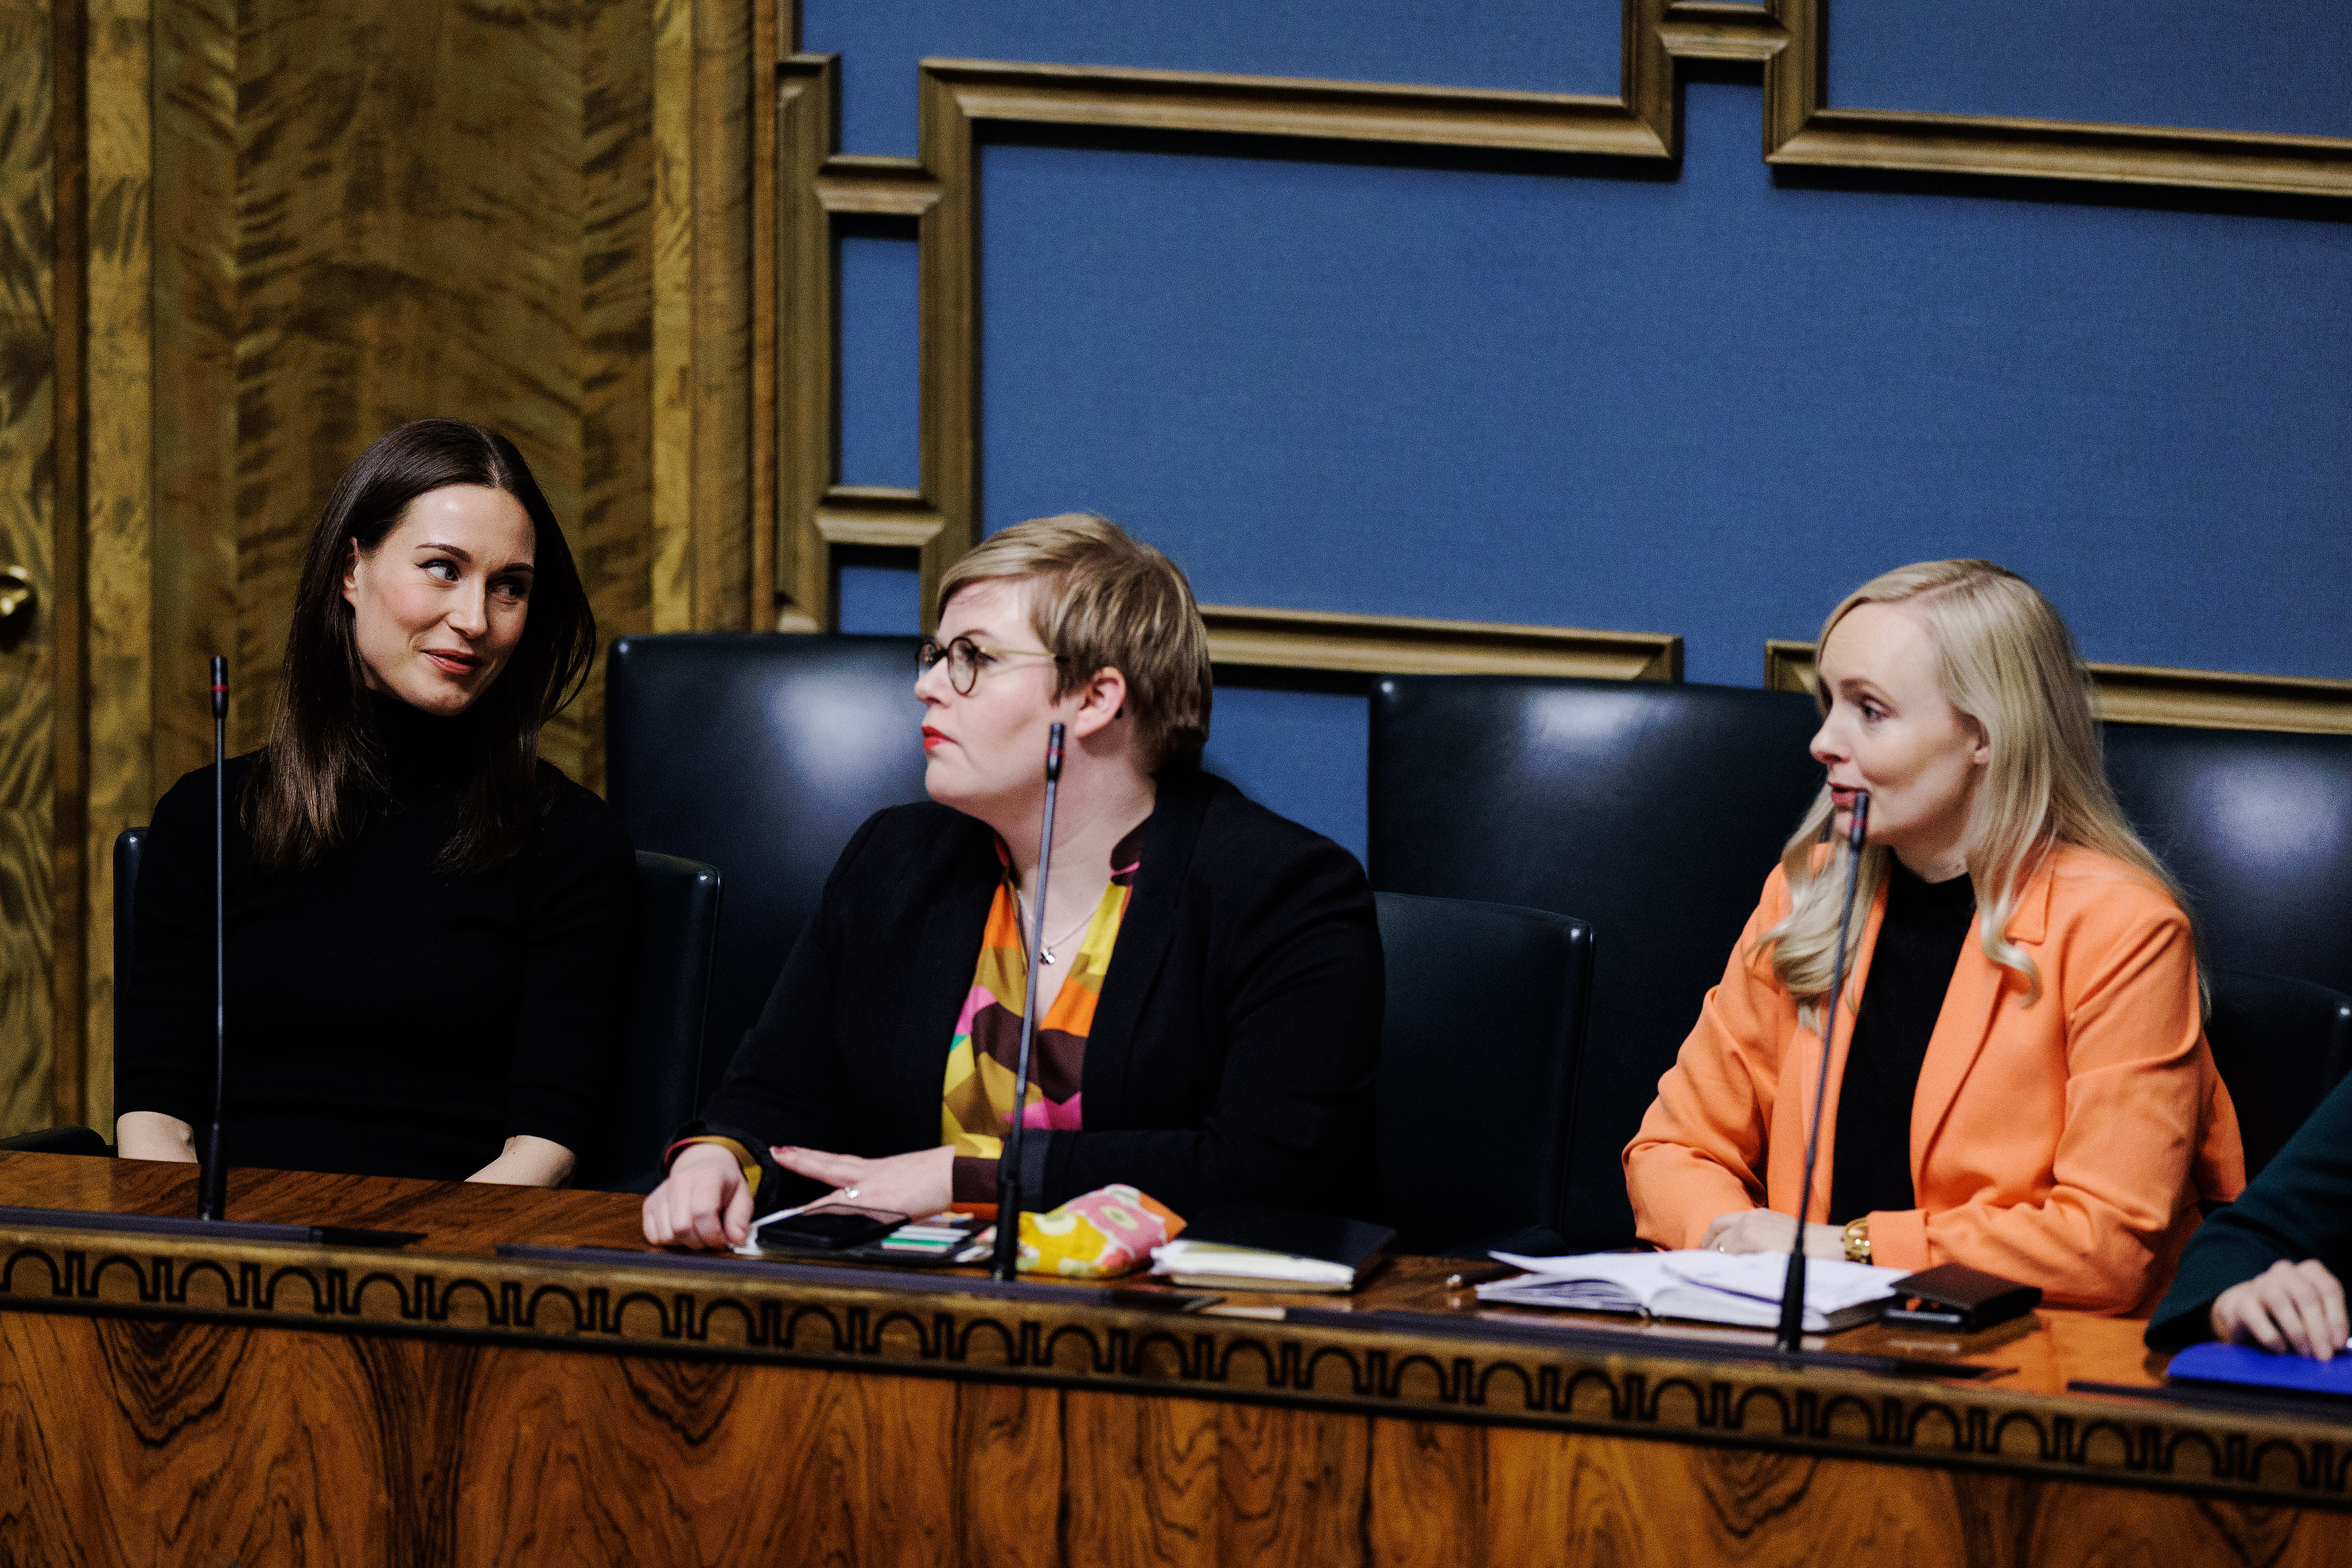 Saarikko: The center cannot join the same coalition after the upcoming elections